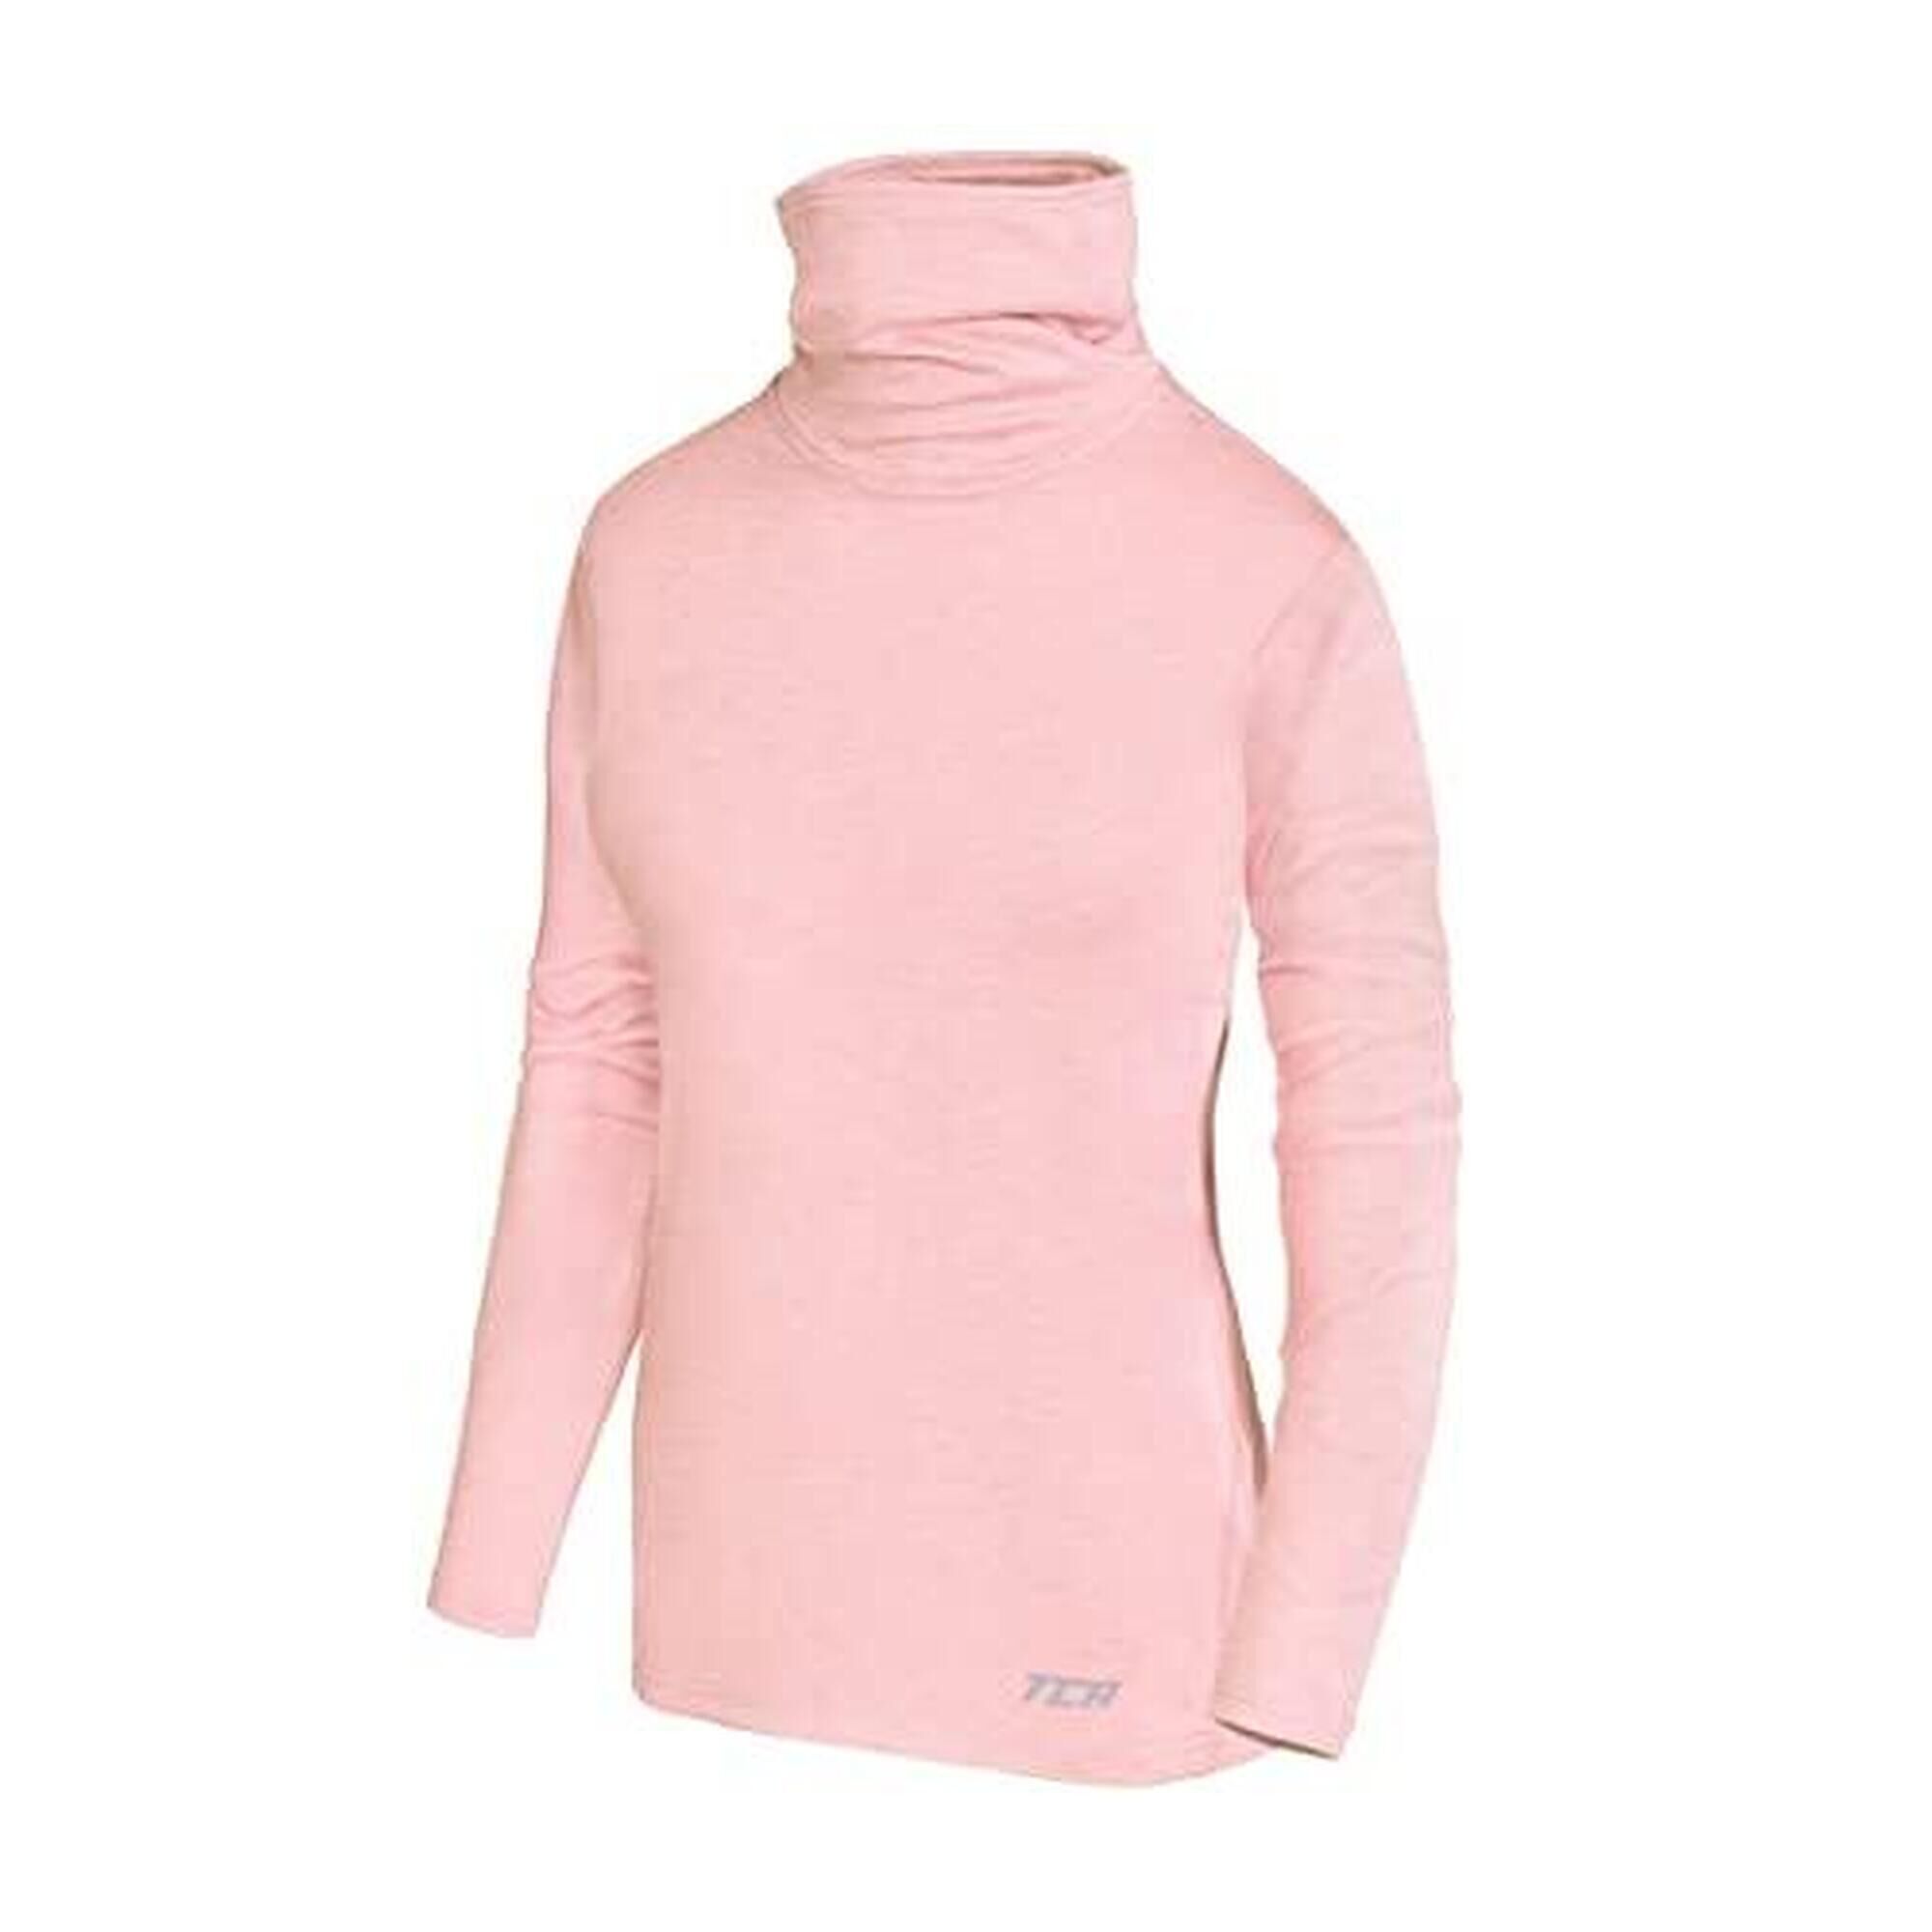 TCA Girls' Thermal Funnel Neck Top - Silver Pink Marl